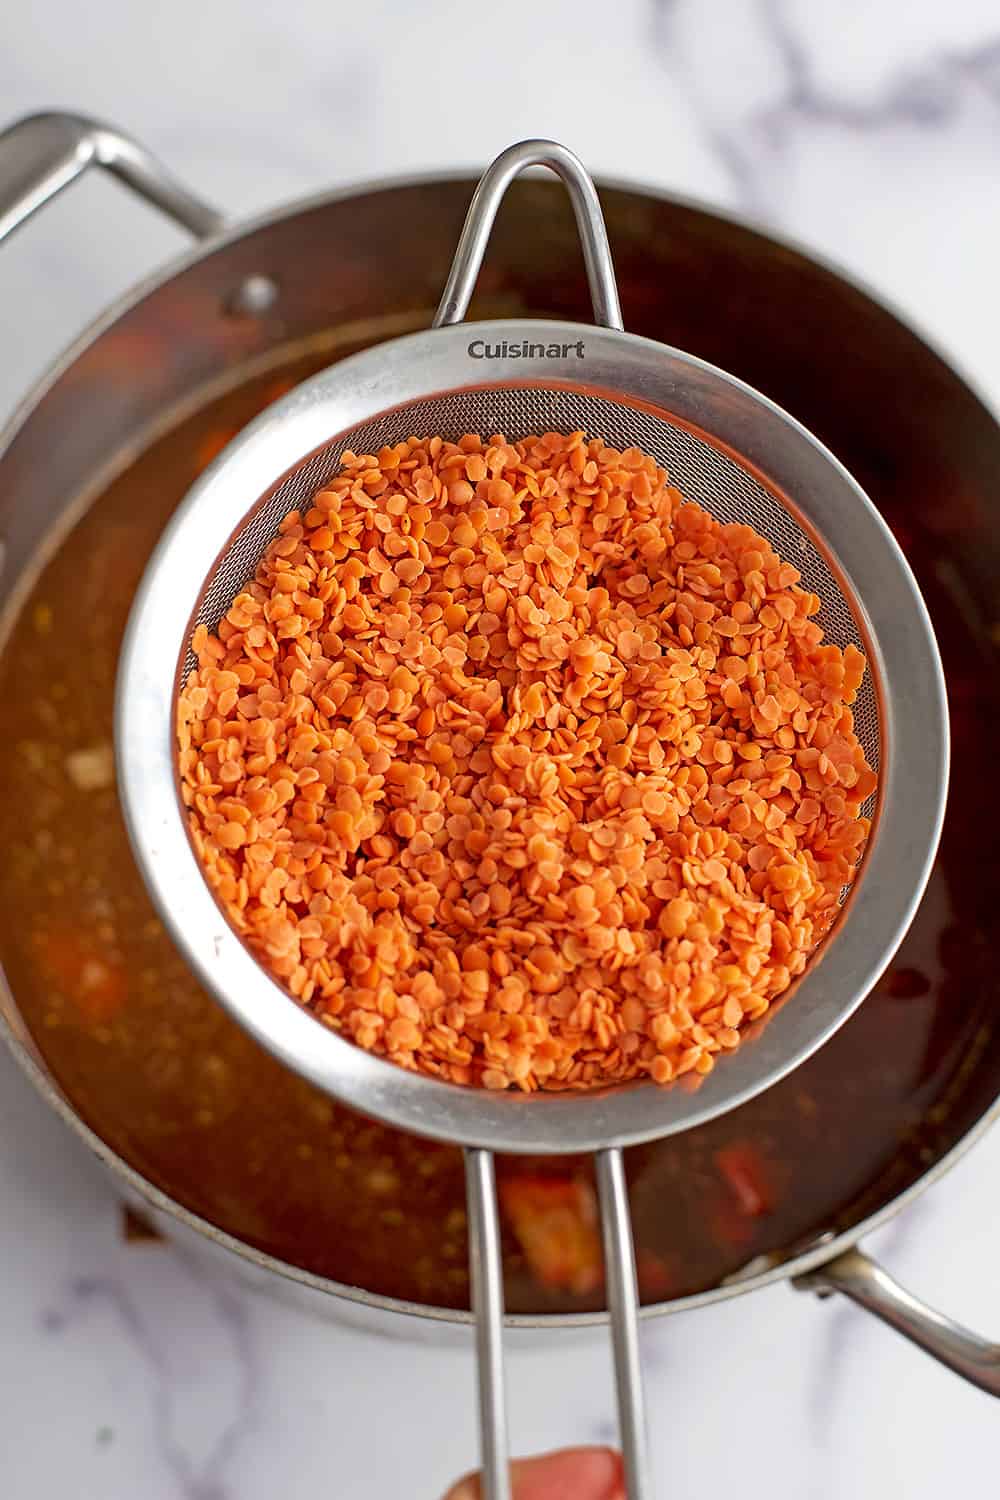 Rinsed red lentils in a mesh strainer over soup.